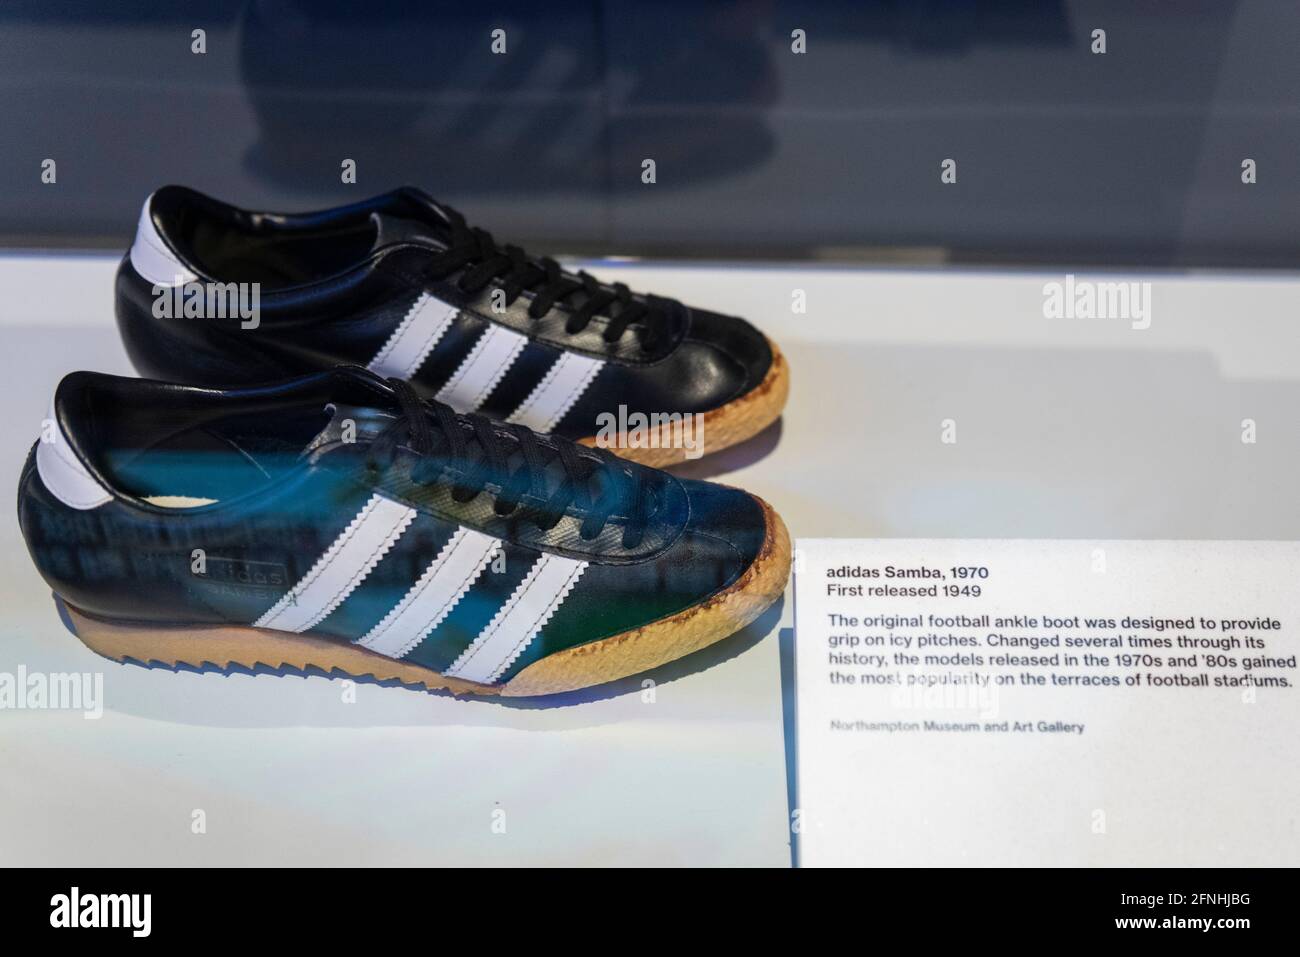 London, UK. 17 May 2021. "Adidas Samba", 1970, first released 1940. The  original football ankle boot was designed to provide grip on icy surfaces.  Preview of “Sneakers Unboxed: Studio to Street” at